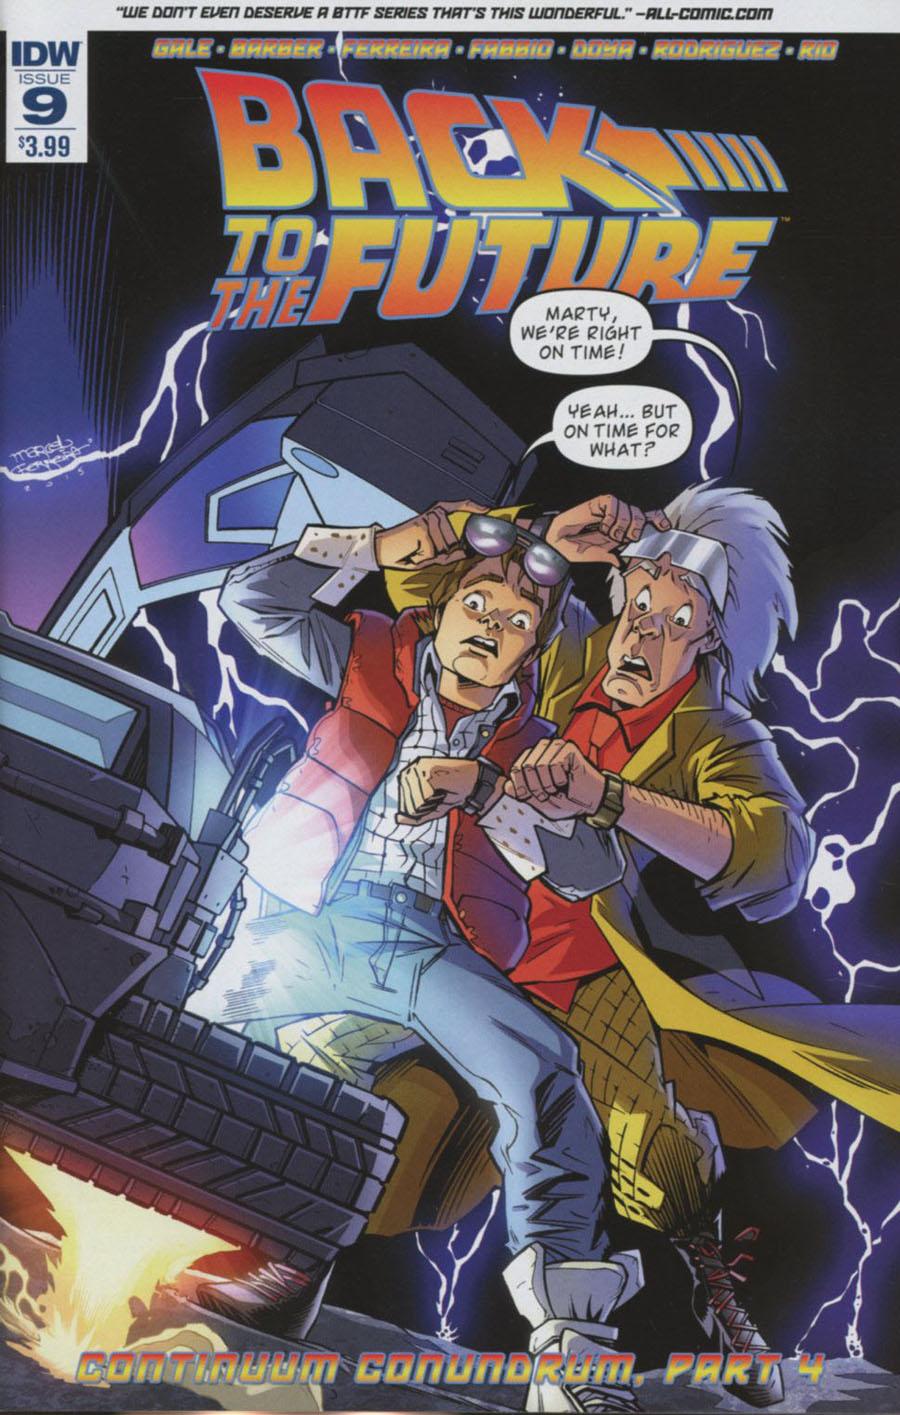 Back To The Future Vol. 2 #9